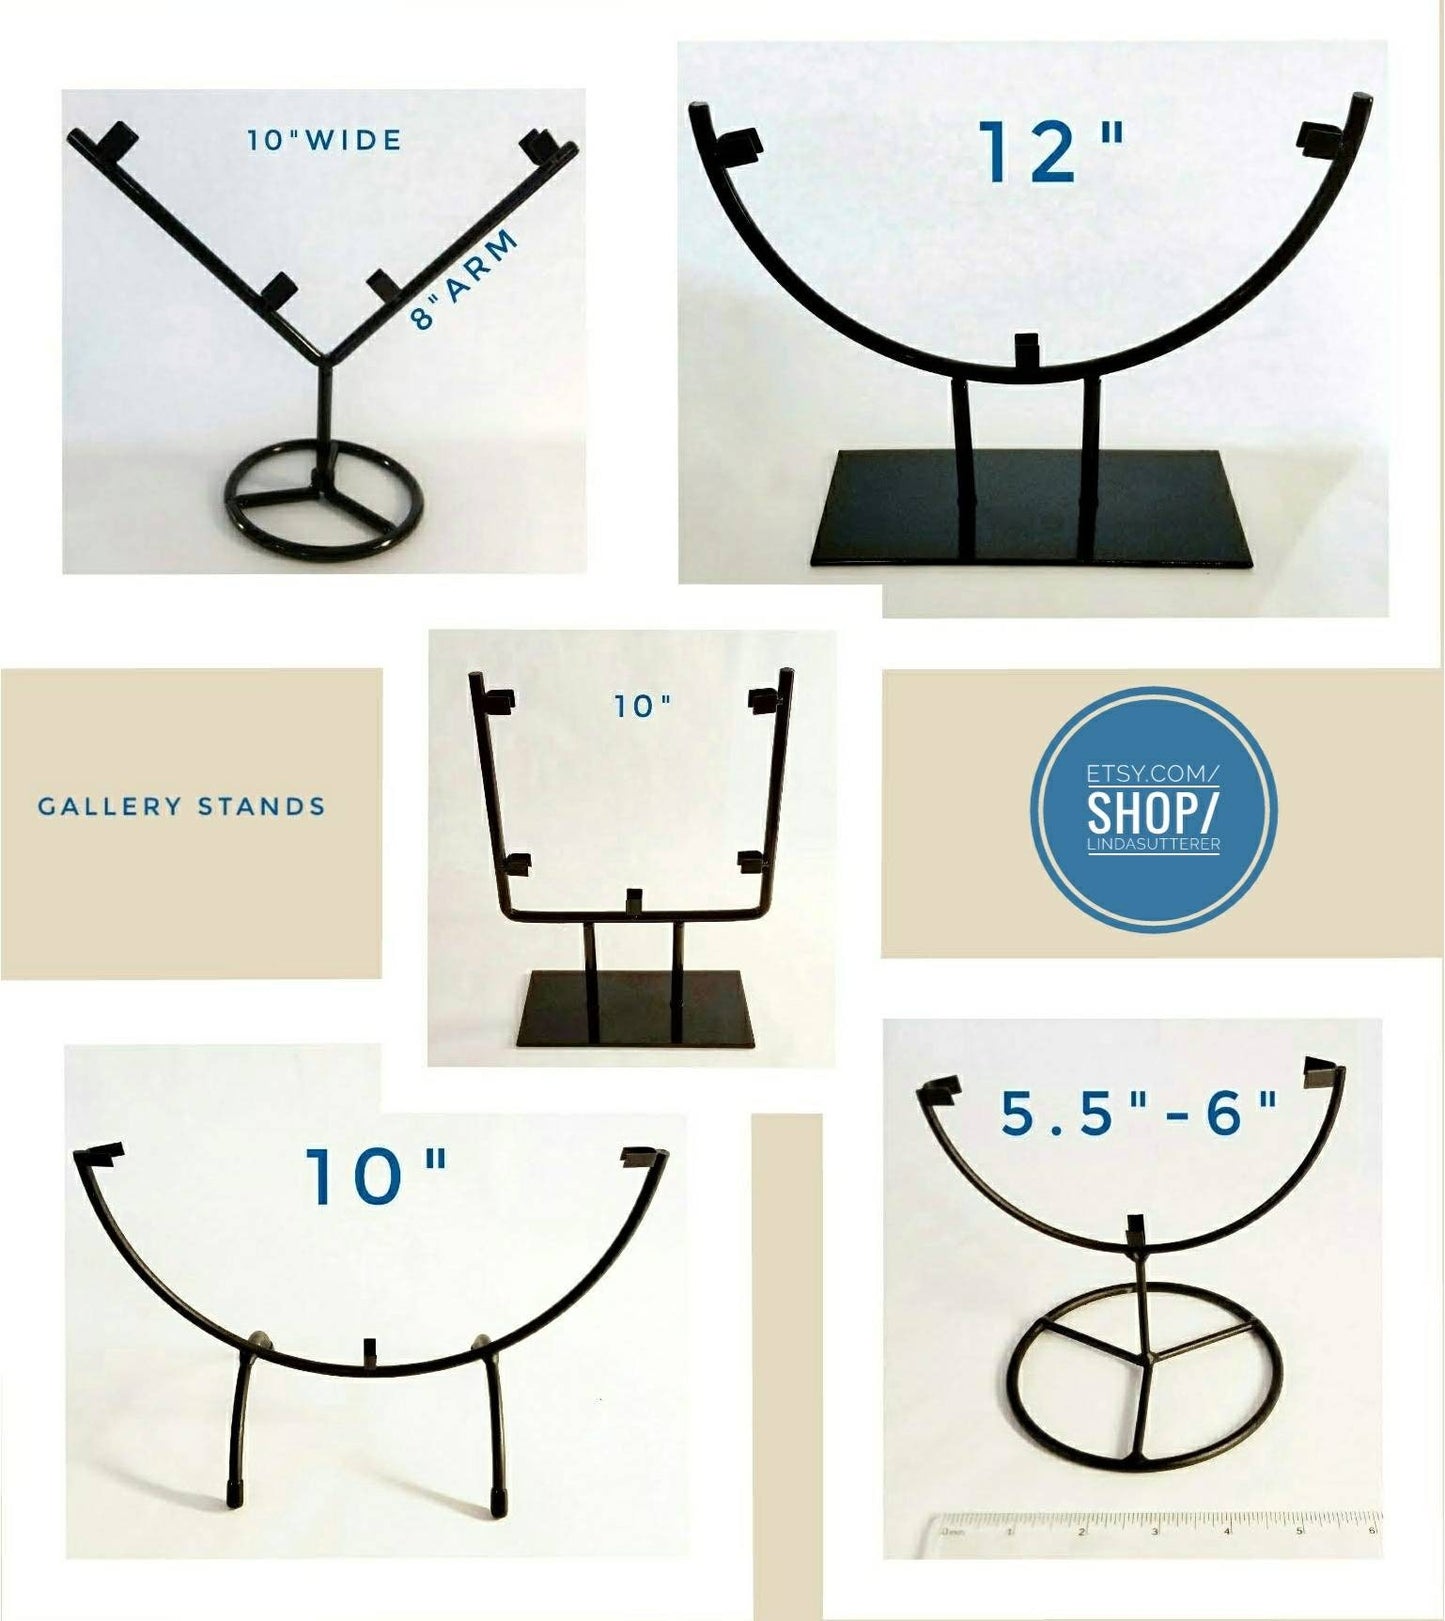 Display Stand on Sturdy Base. Mission Style Black Metal. 12"x14" for Stained or Fused Glass. Heavy wrought iron for mixed media art.